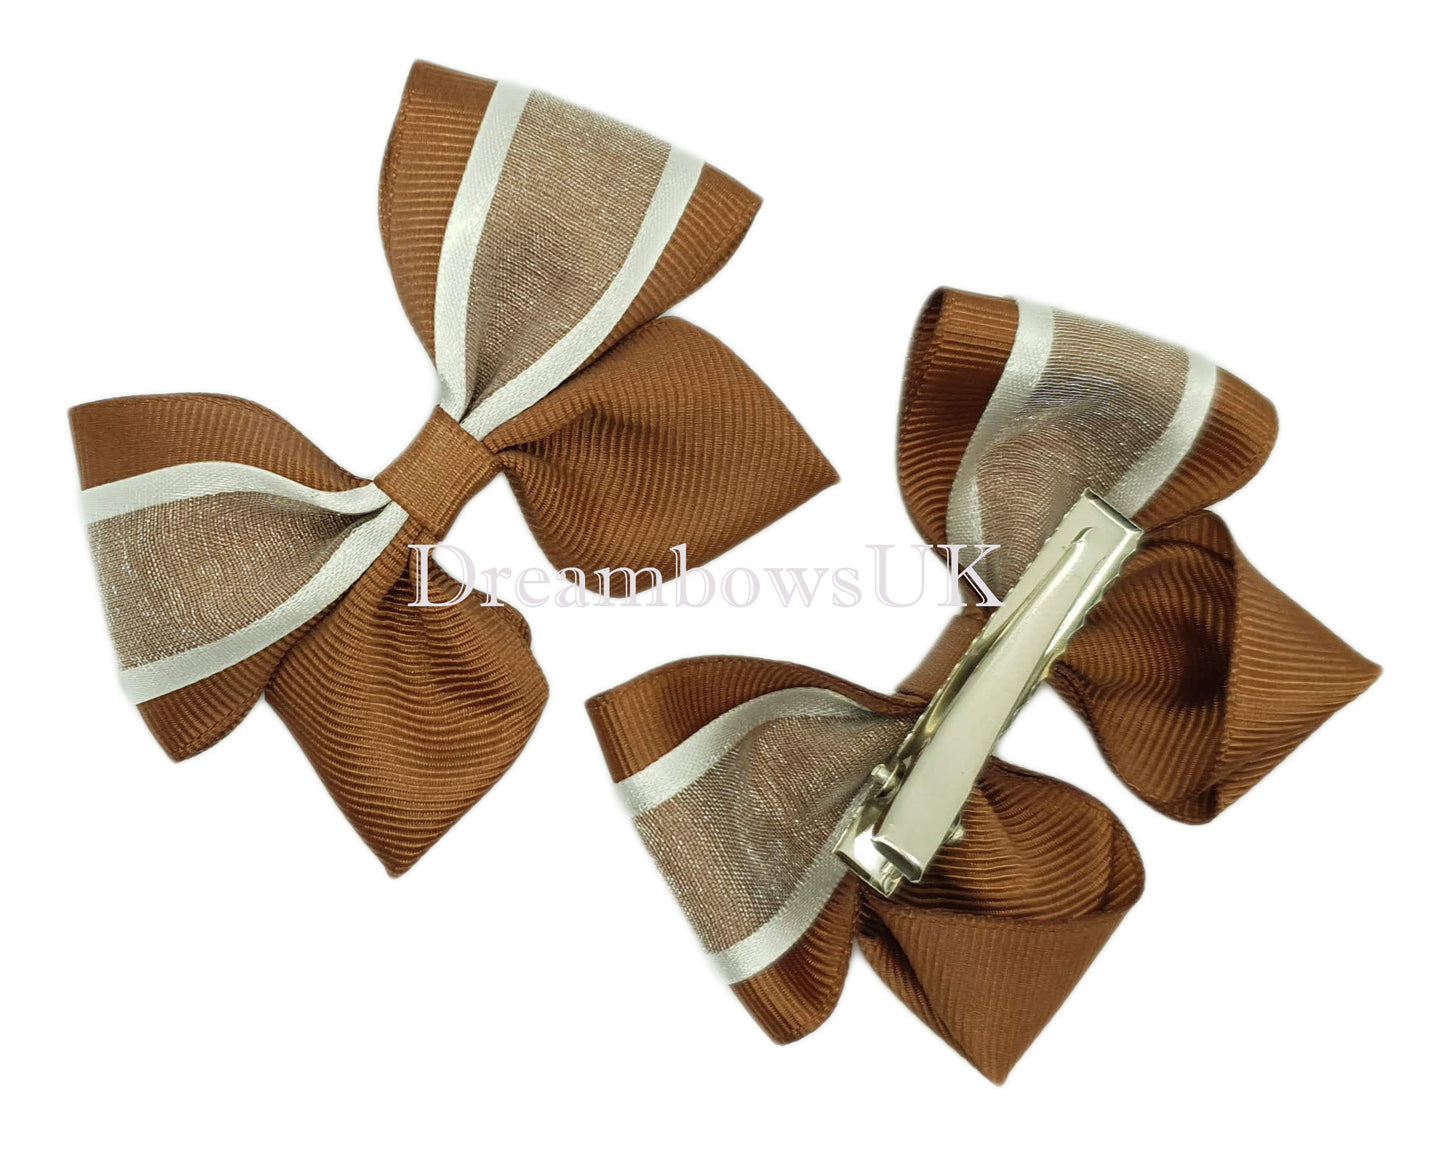 Brown and white organza hair bows on alligator clips